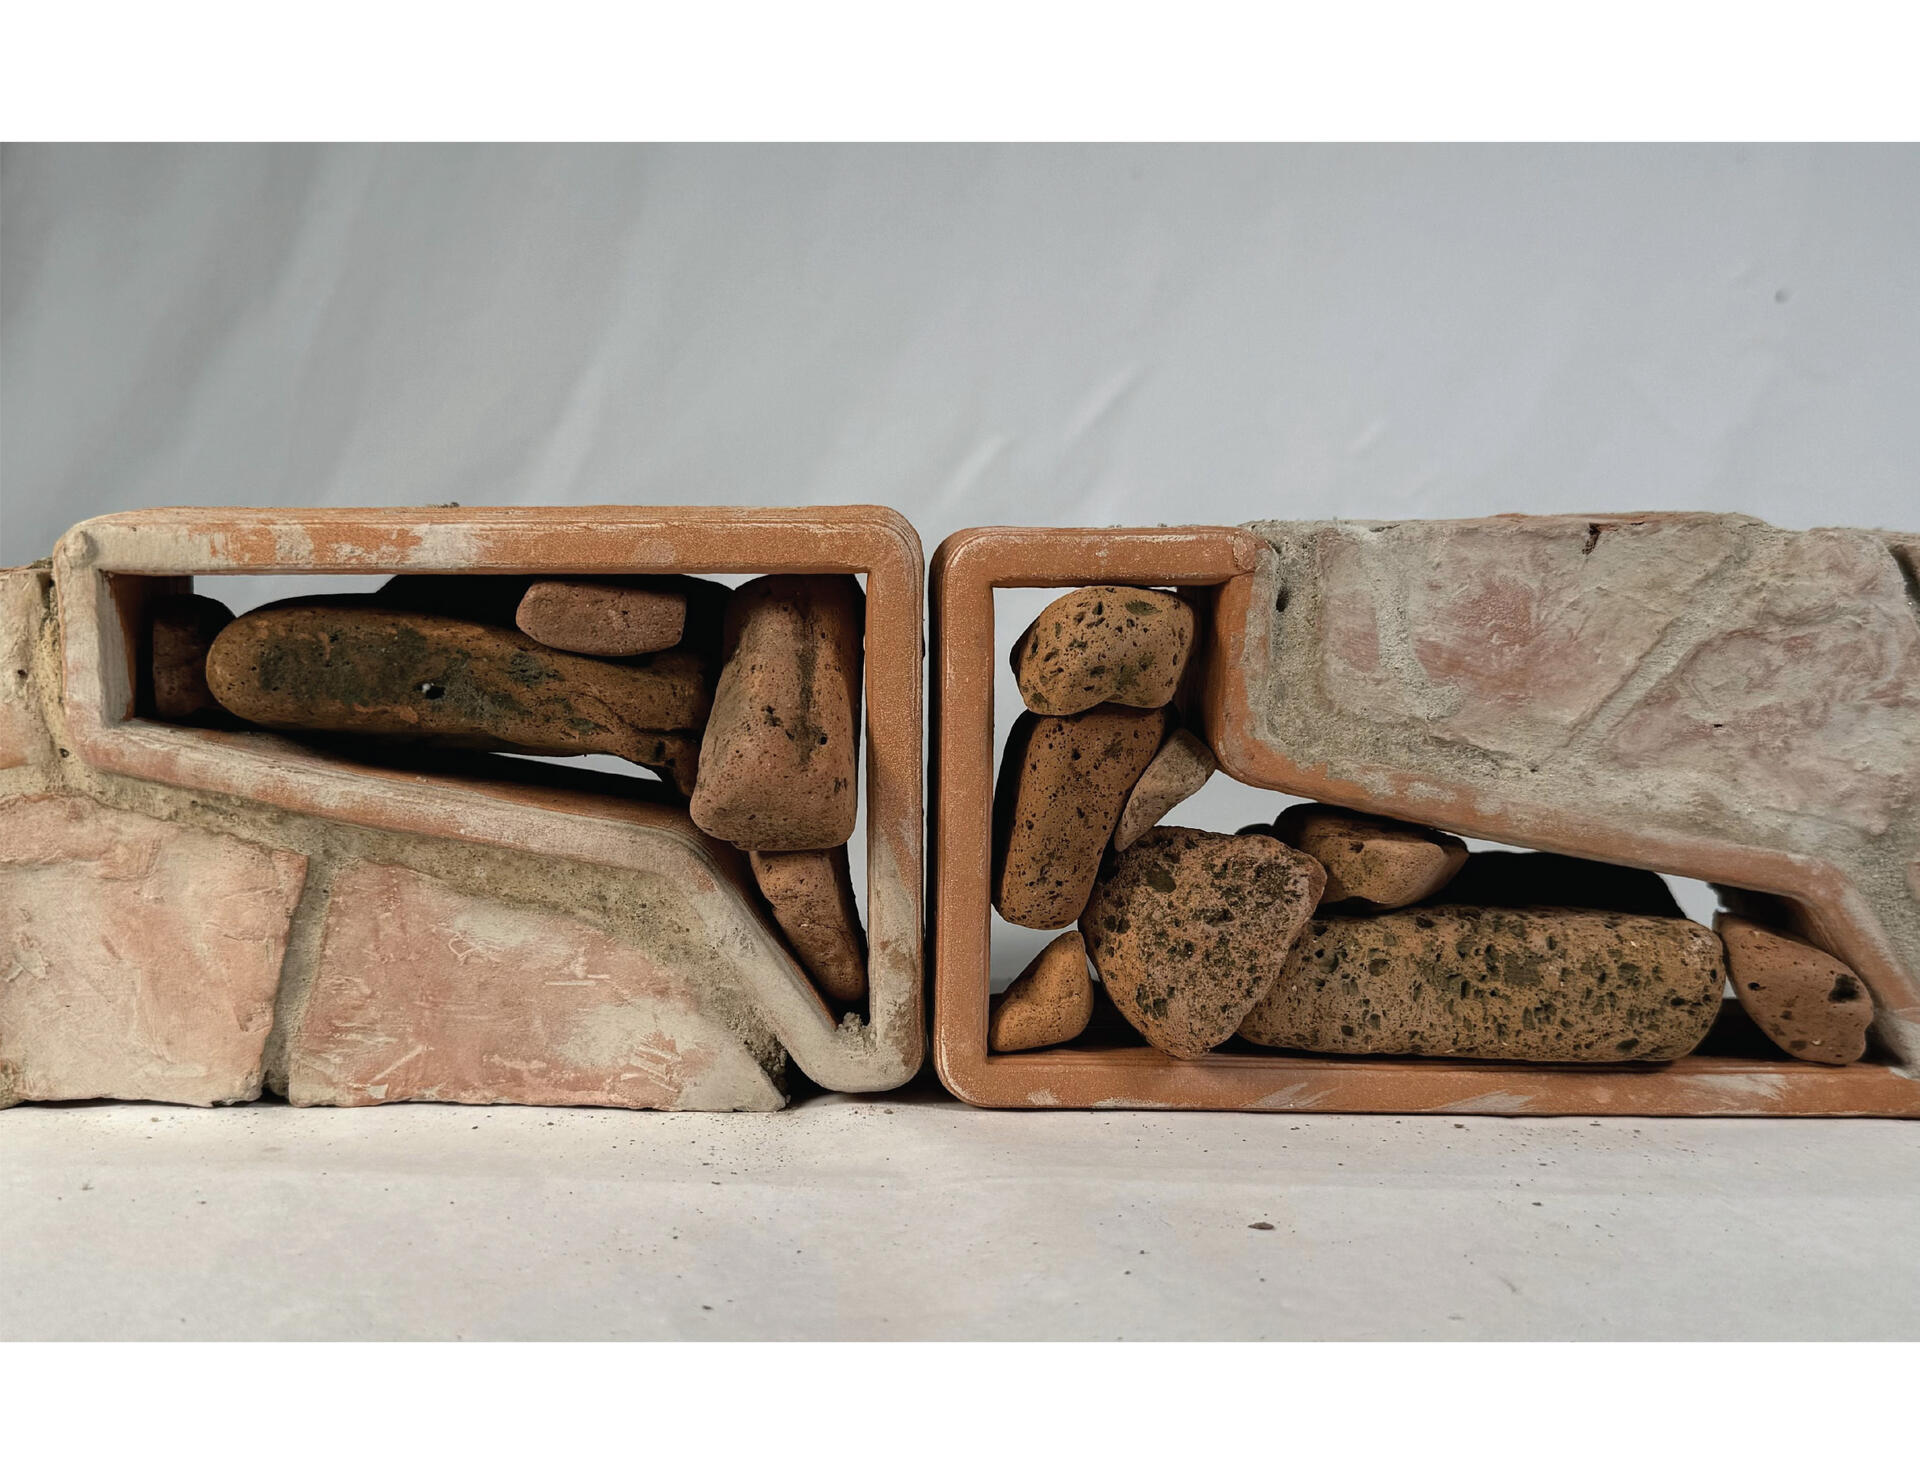 Image is of a prototype of the the brick themselves showing how the rubble is stacked within the form.